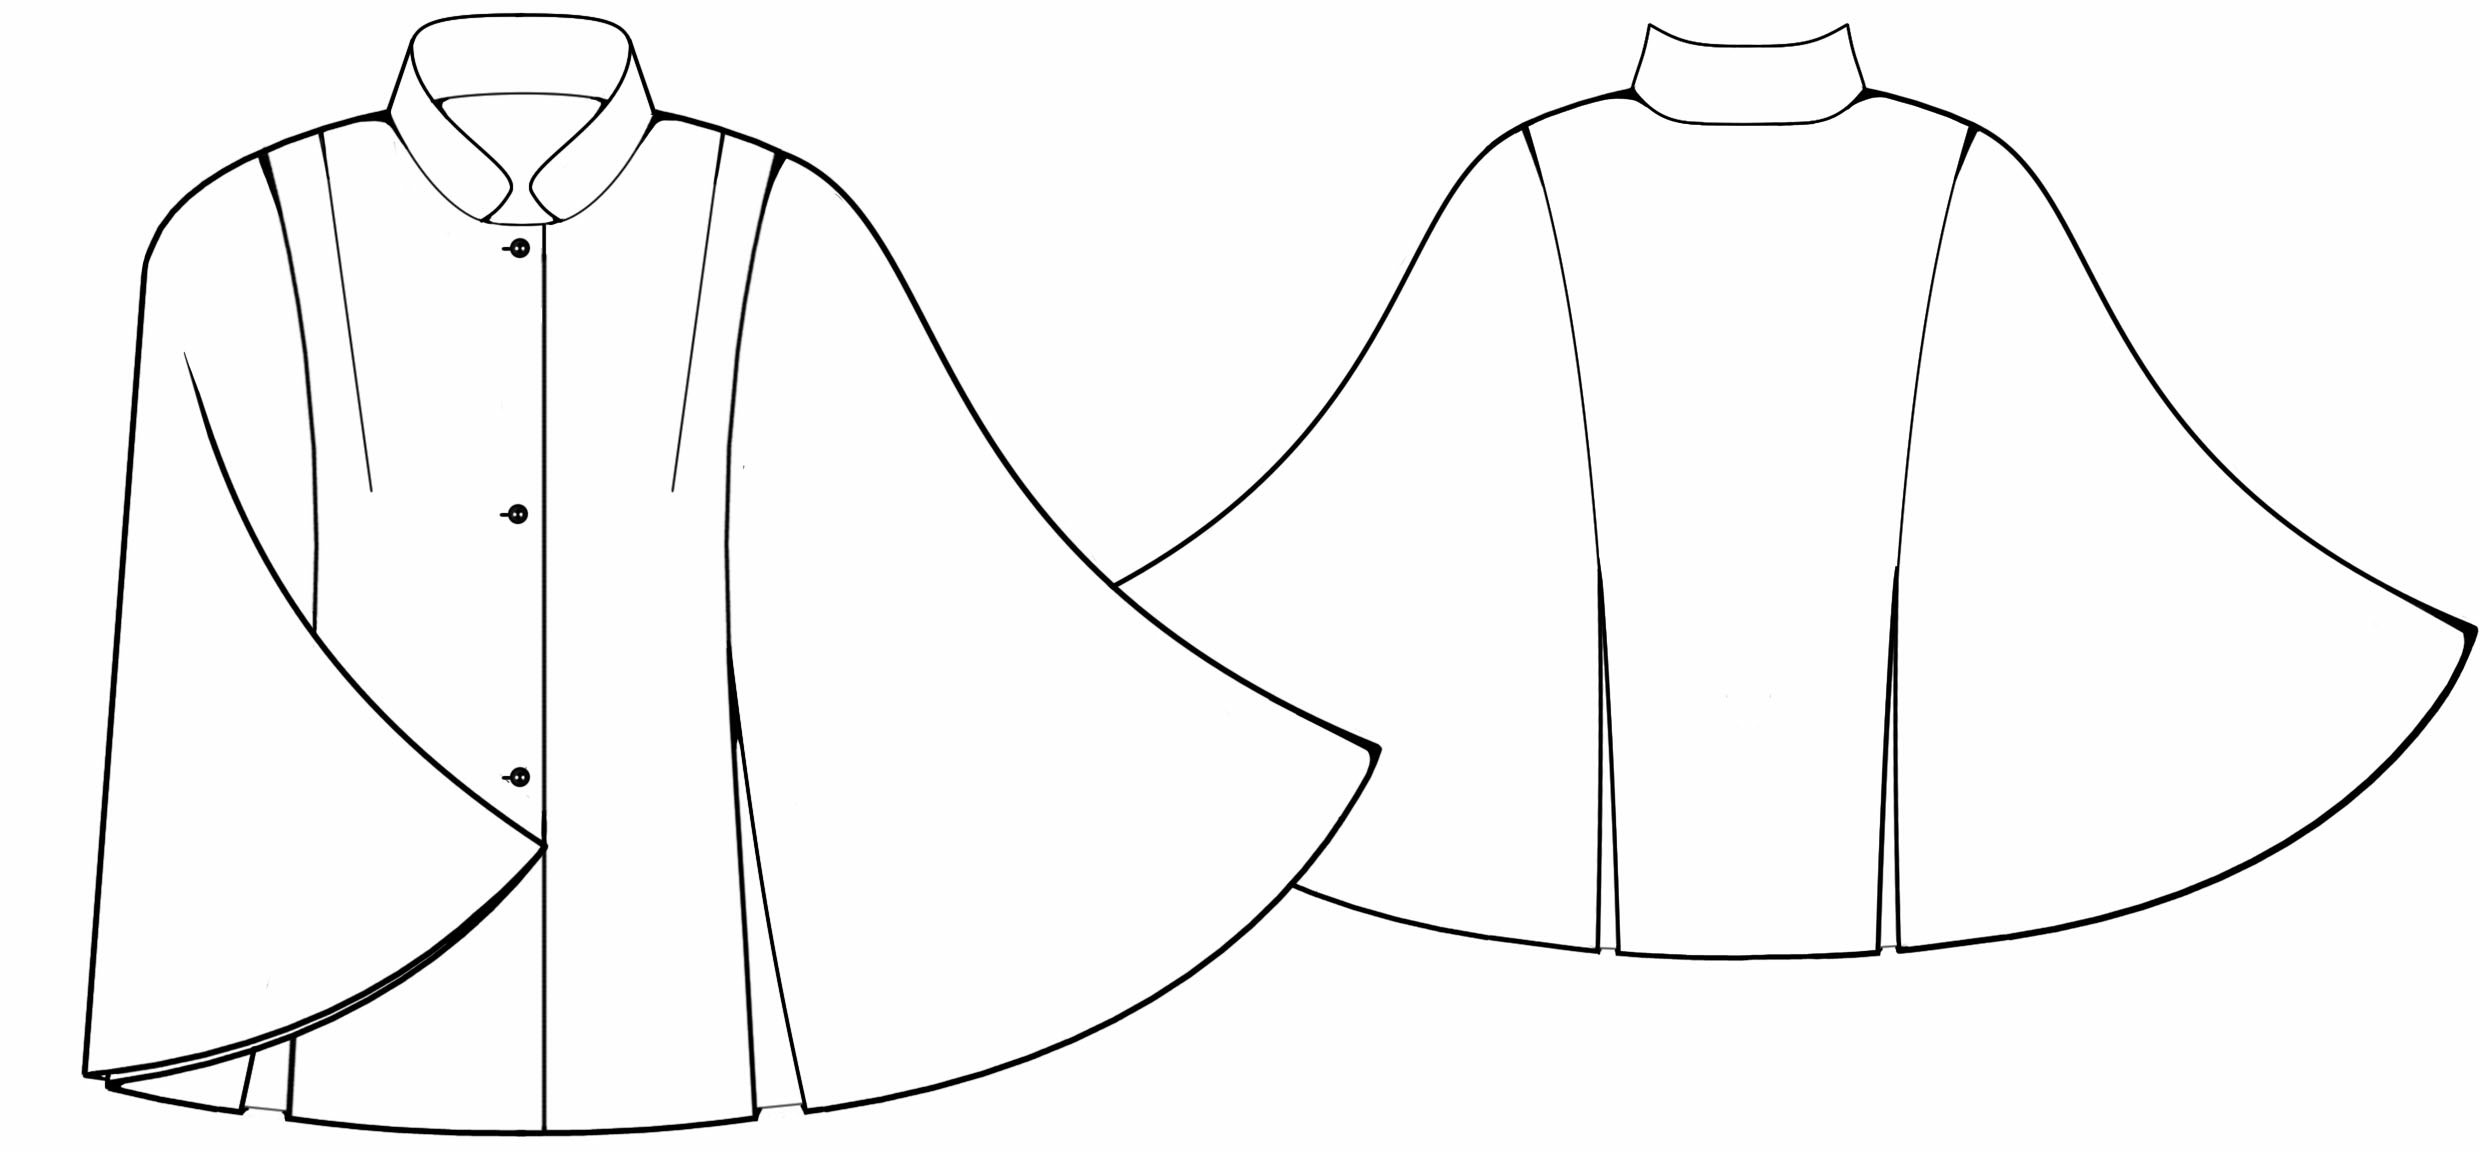 Creative Fabric Cloak Cape Sketch Drawing How To with simple drawing